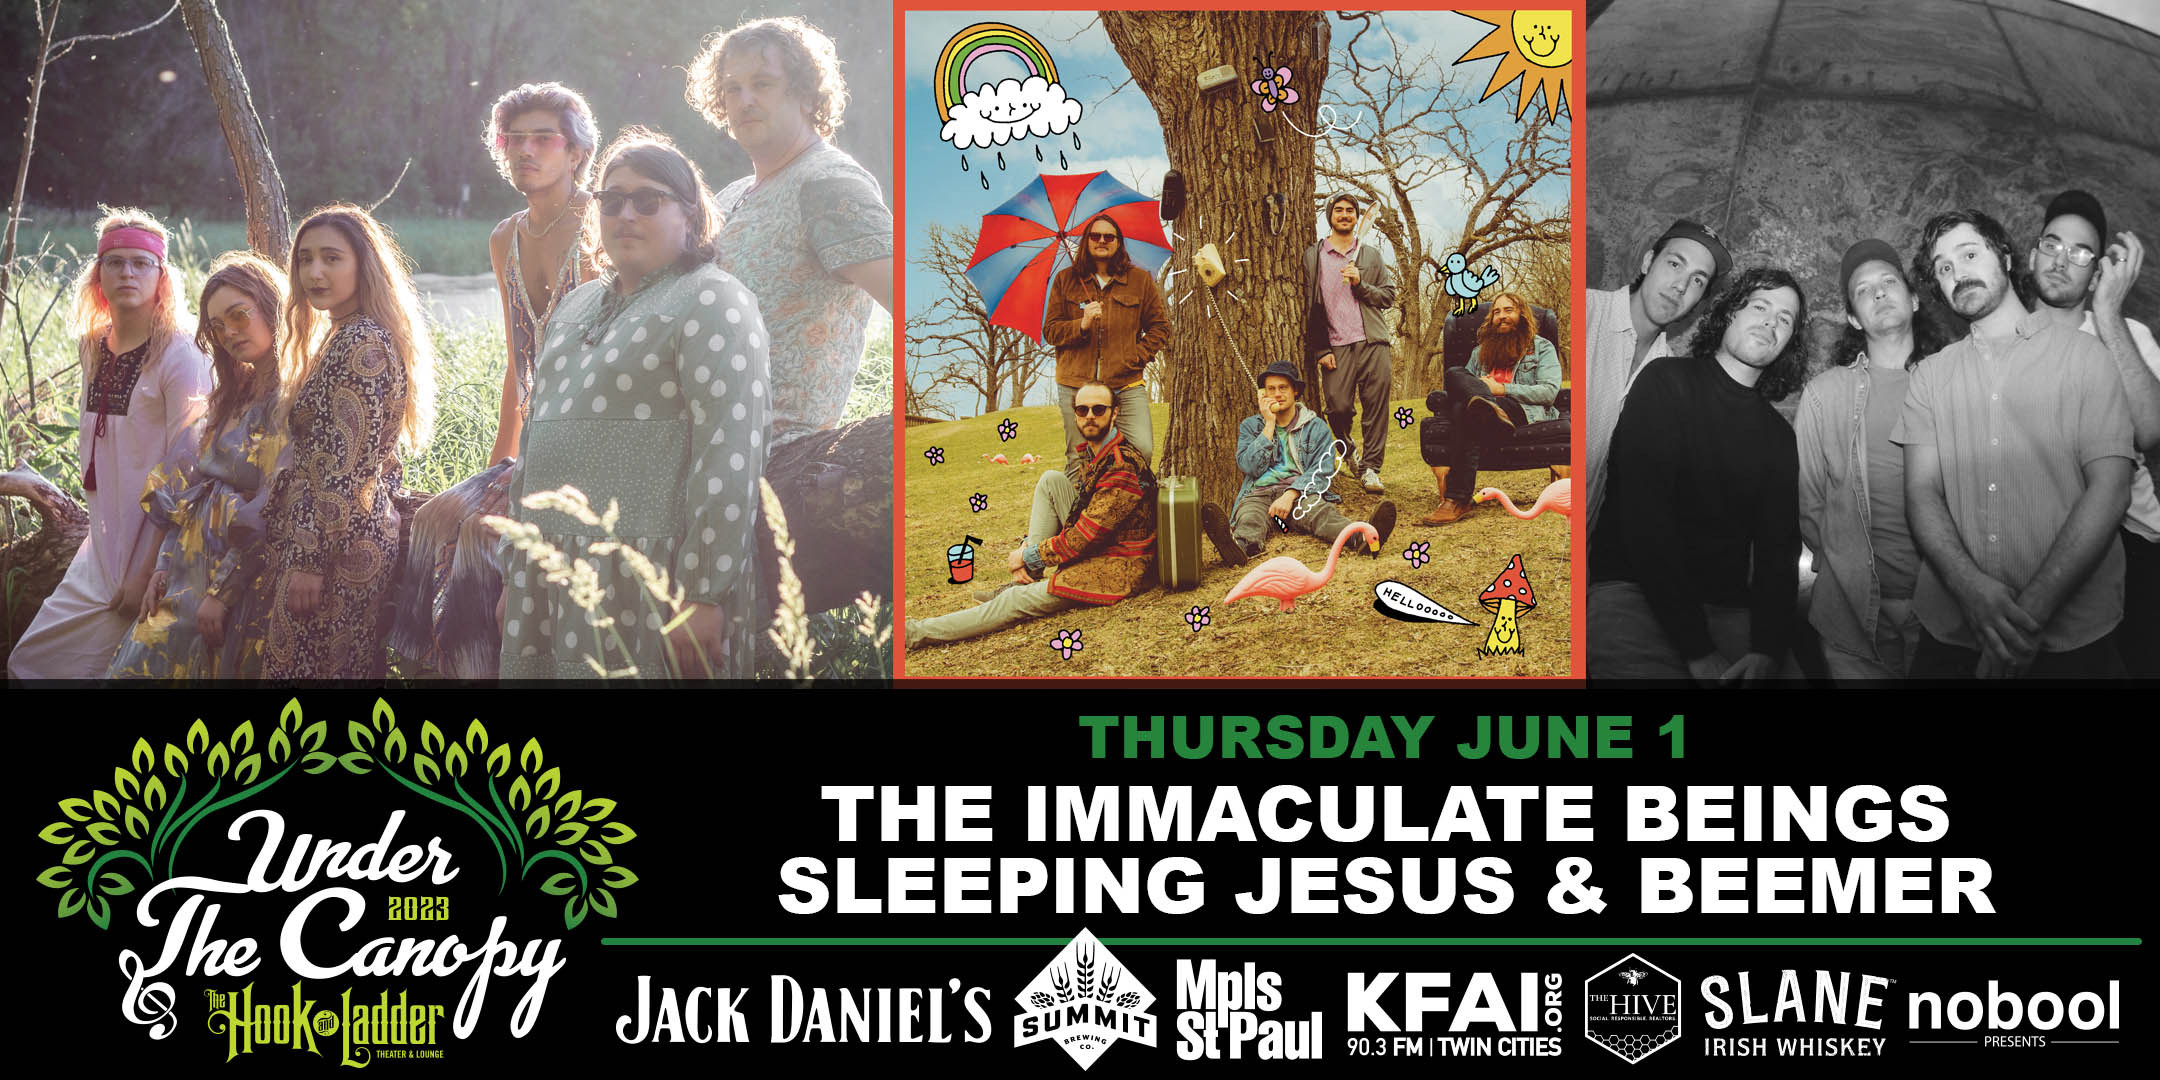 The Immaculate Beings, Sleeping Jesus, and Beemer Thursday, June 1 Under The Canopy at The Hook and Ladder Theater "An Urban Outdoor Summer Concert Series" Doors 6:00pm :: Music 7:00pm :: 21+ Reserved Seats: $25 GA: $20 ADV / $25 DOS *Does not include Fees